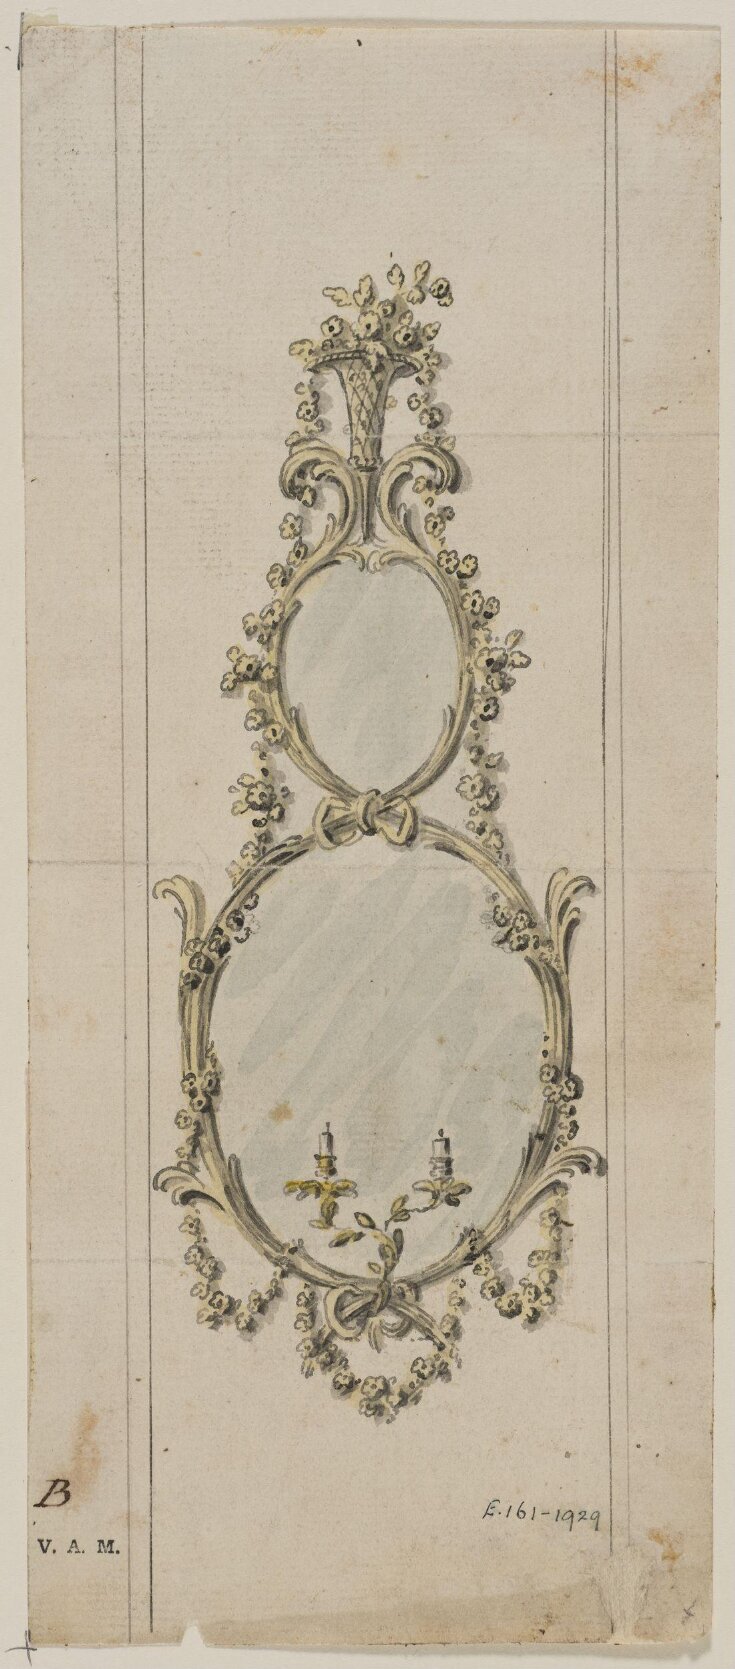 Design for a sconce from; A Miscellaneous Collection of Original Designs, made, and for the most part executed, during an extensive Practice of many years in the first line of his Profession, by John Linnell, Upholsterer Carver & Cabinet Maker. Selected from his Portfolios at his Decease, by C. H. Tatham Architect. AD 1800. top image